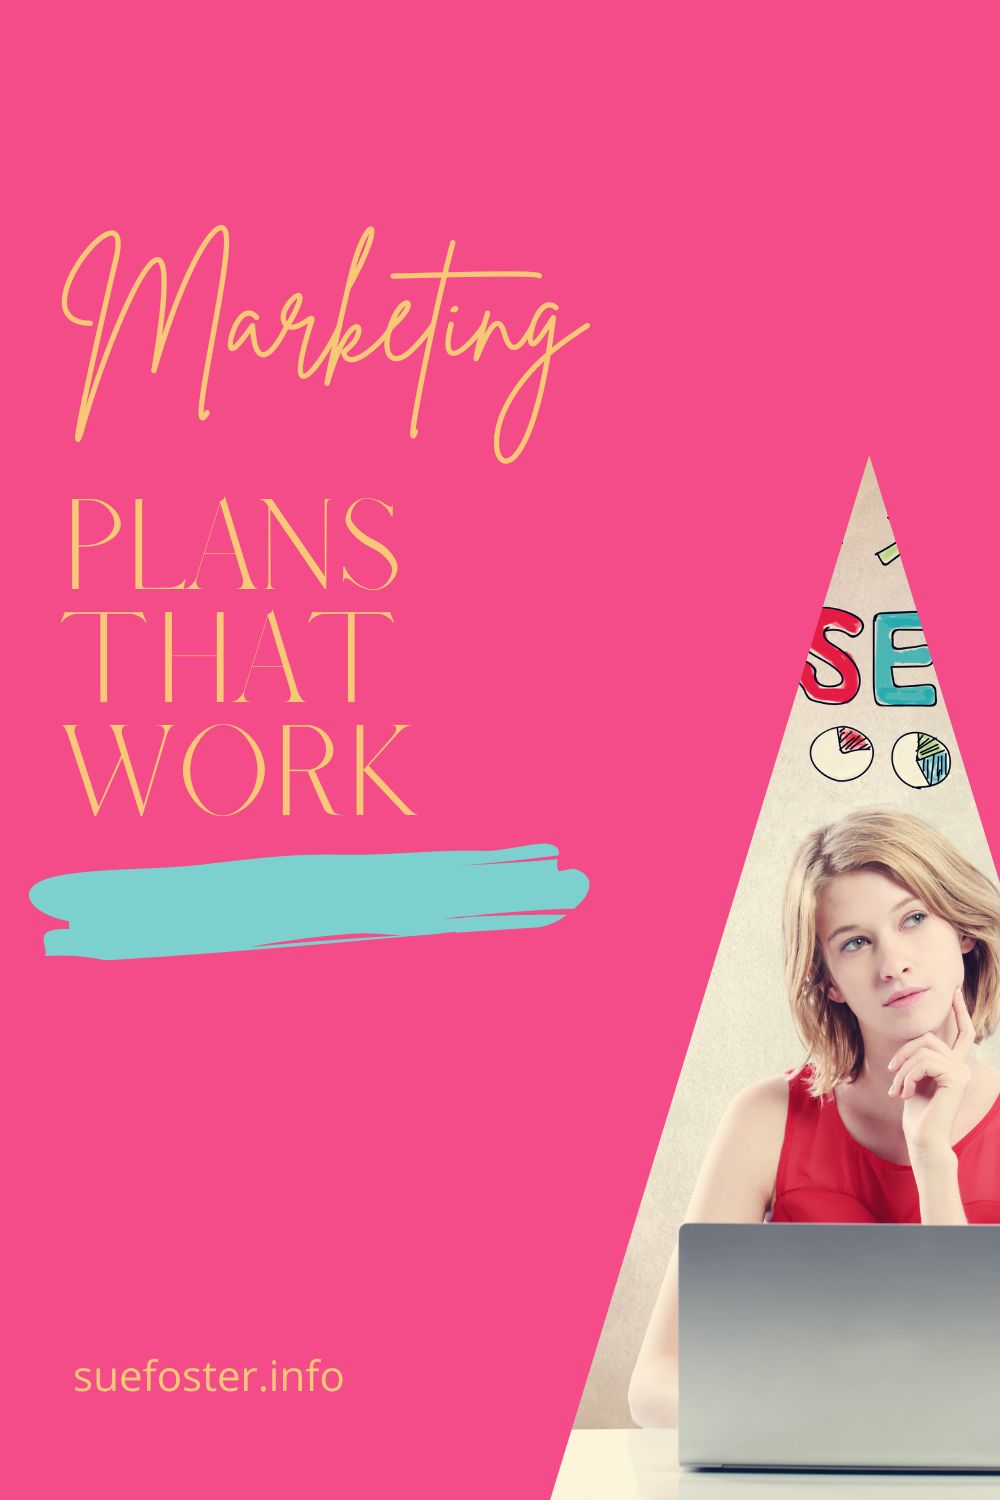 What are customers seeing when you're marketing and are they even seeing you at all? Here are some marketing plans that will work.